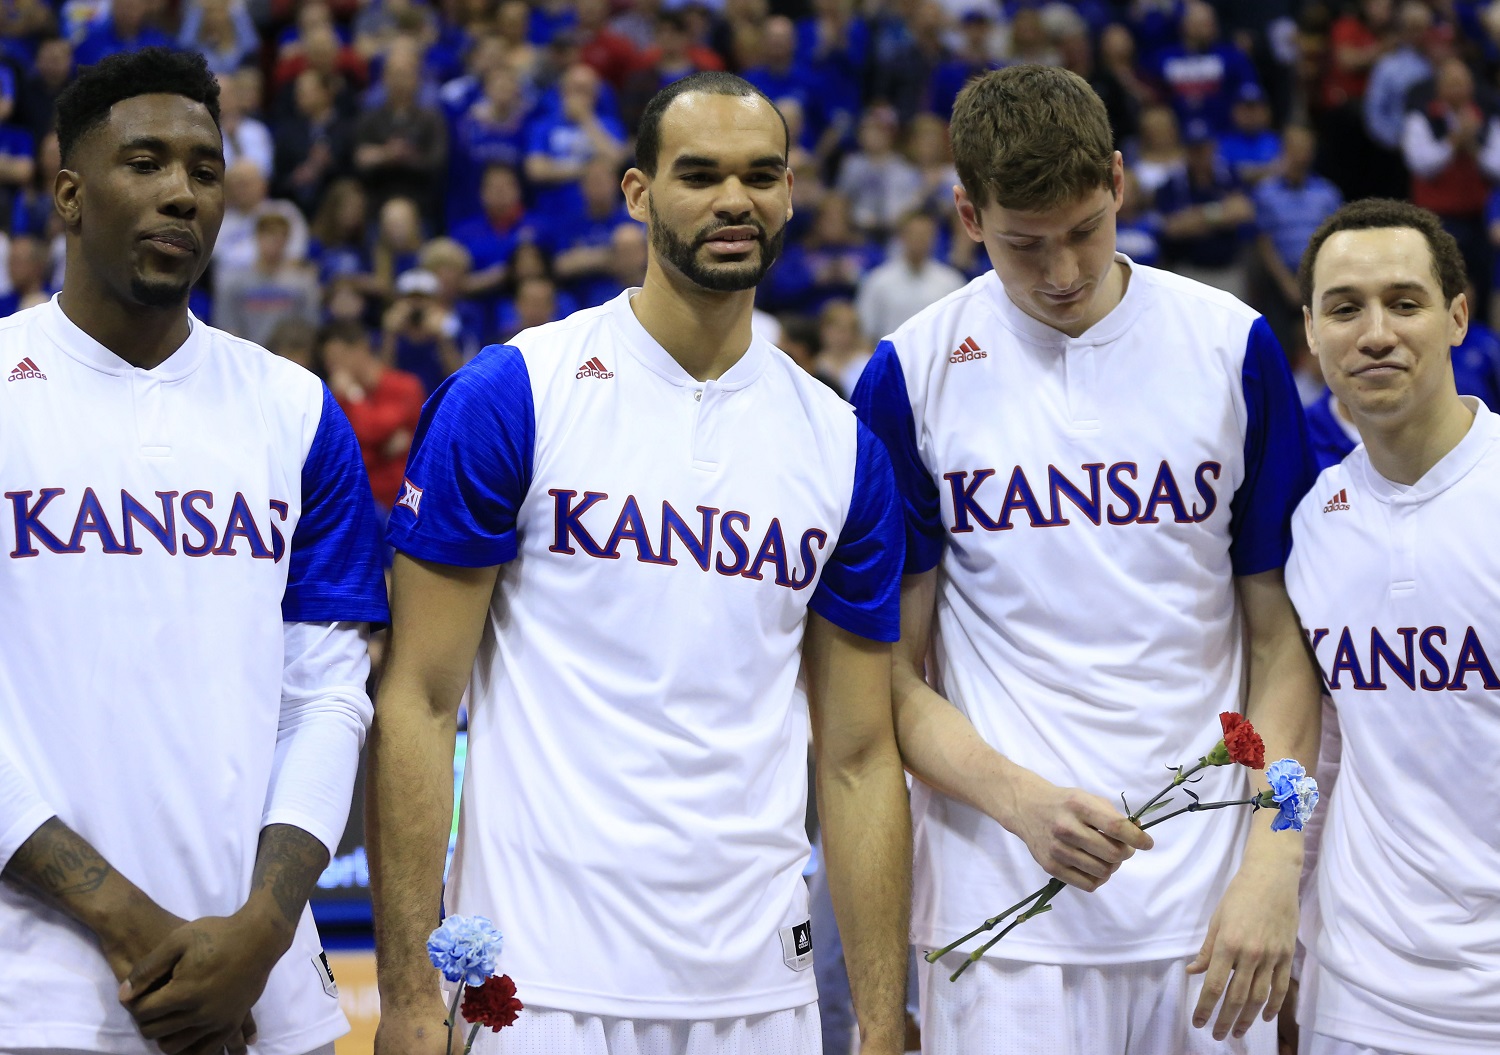 Kansas seniors, from left, Jamari Traylor, Perry Ellis, Hunter Mickelson and Evan Manning, right, pose for a photograph before an NCAA college basketball game against Iowa State in Lawrence, Kan., Saturday, March 5, 2016. (AP Photo/Orlin Wagner)